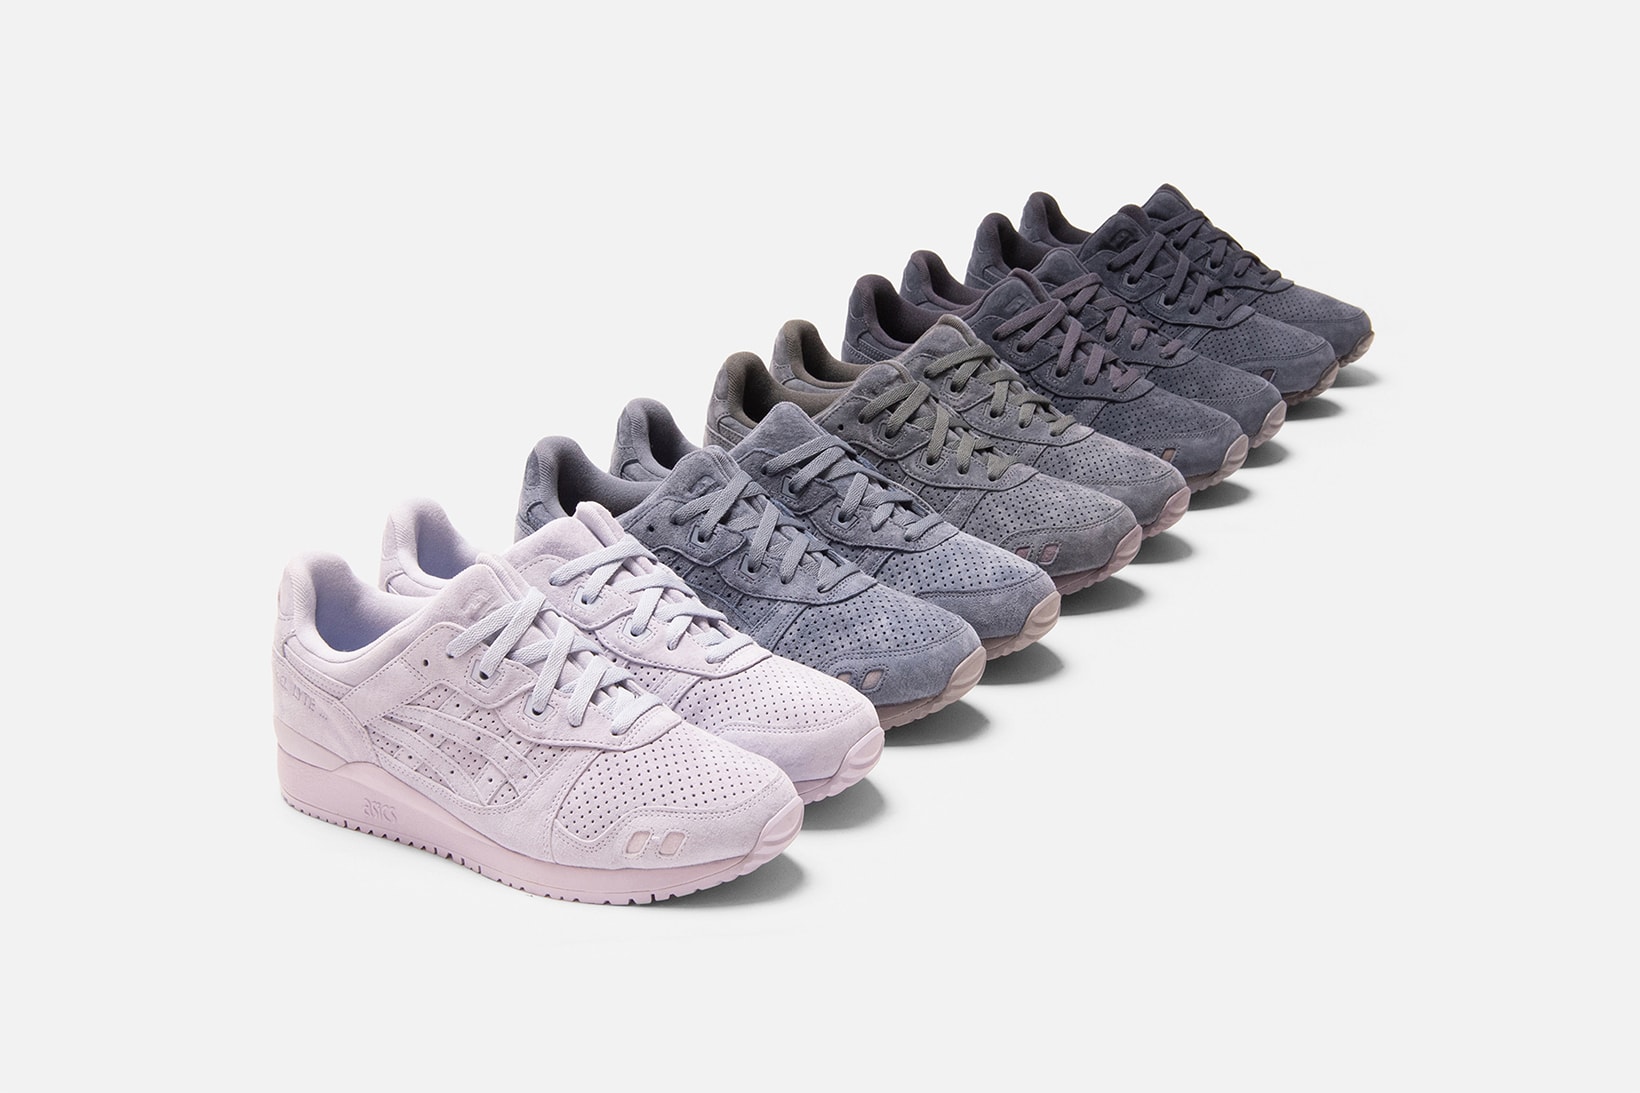 asics kith ronnie fieg collaboration gel lyte iii the palette colorways footwear shoes 